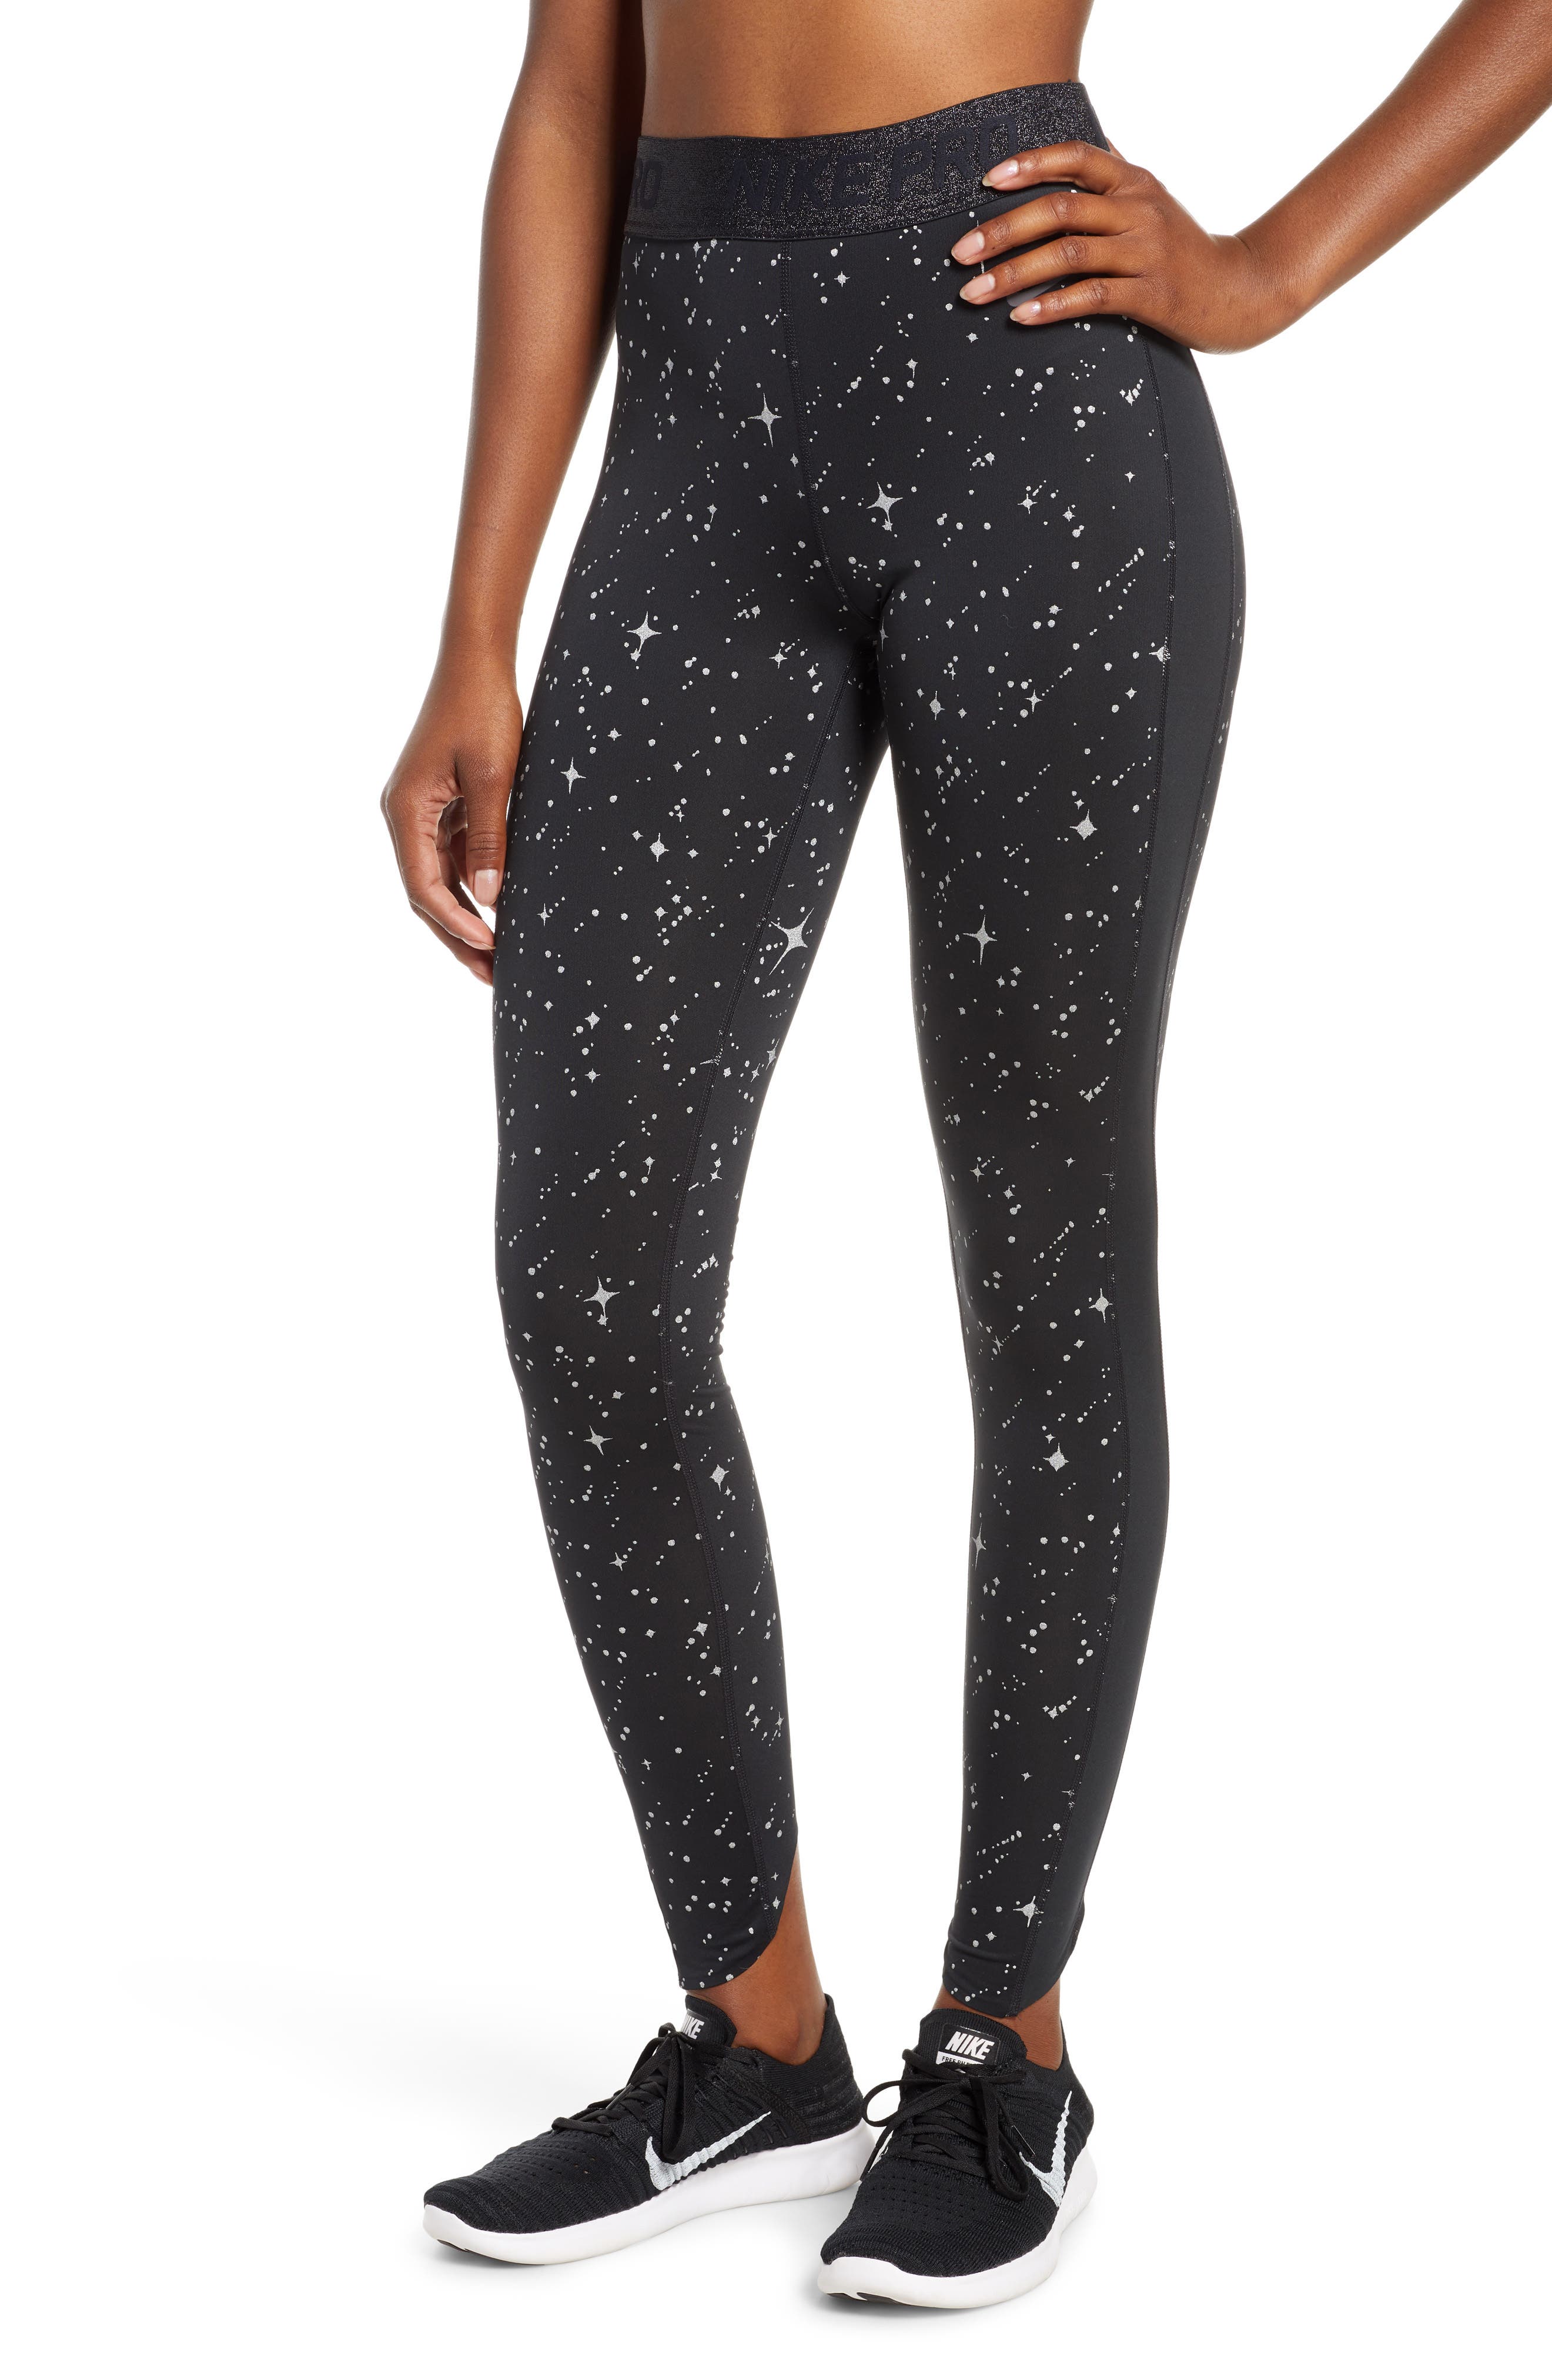 nike starry tights online -